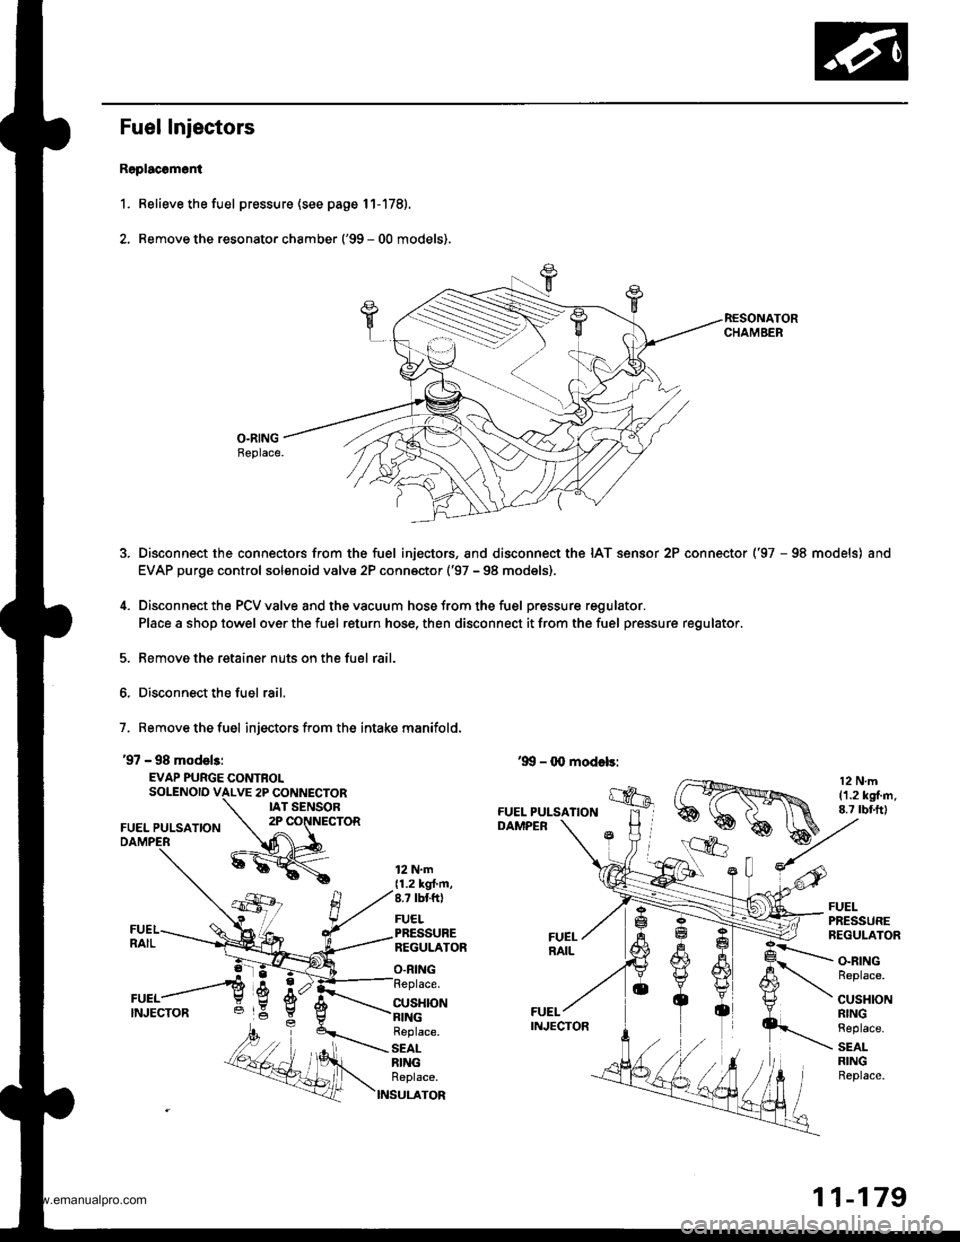 HONDA CR-V 1998 RD1-RD3 / 1.G Workshop Manual 
Fuel Injectors
R6placomoni
1. Relieve the fuel pressure (see page 11-178).
2. Remove the resonato. chamber (99 - 00 models).
O.RINGBeplace.
Disconnect the connectors from the fuel injectors, and dis